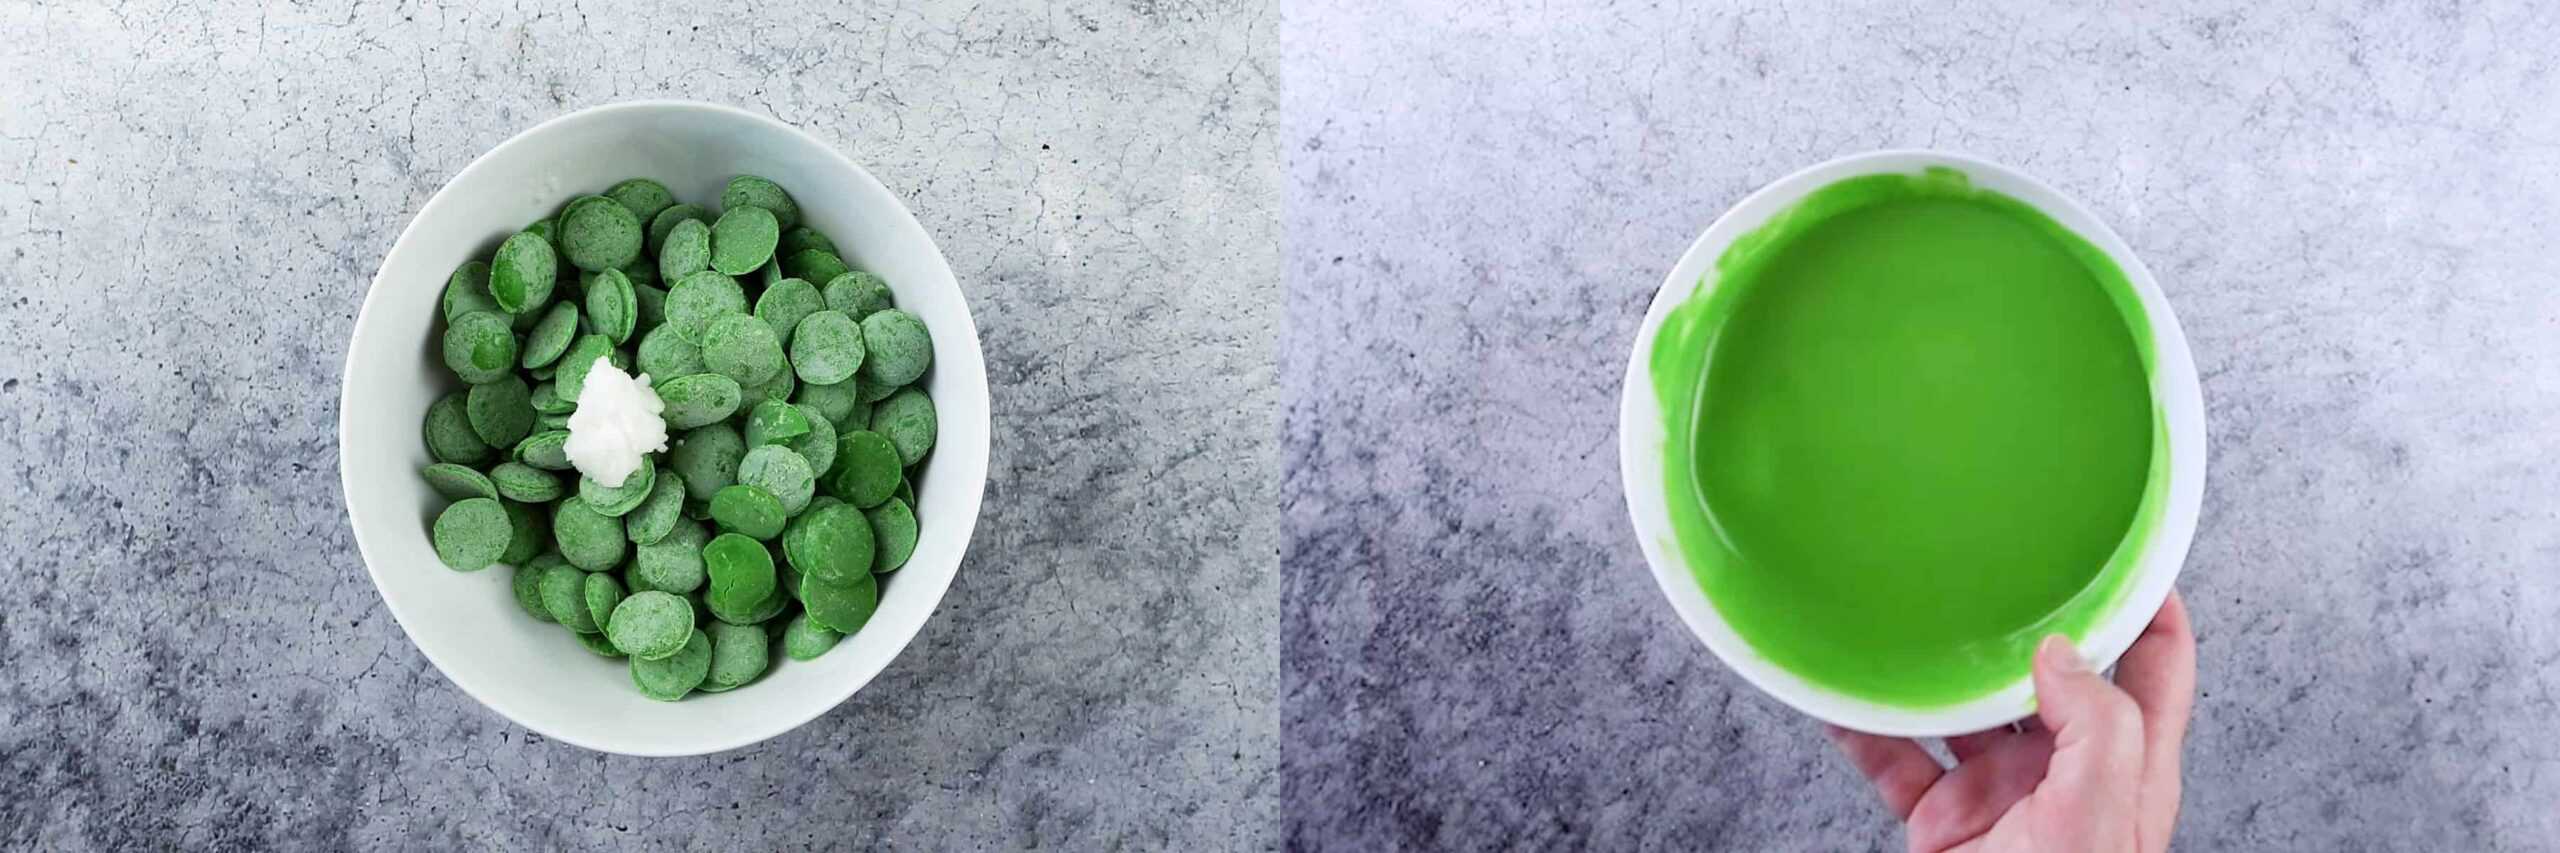 before and after melting candy melts